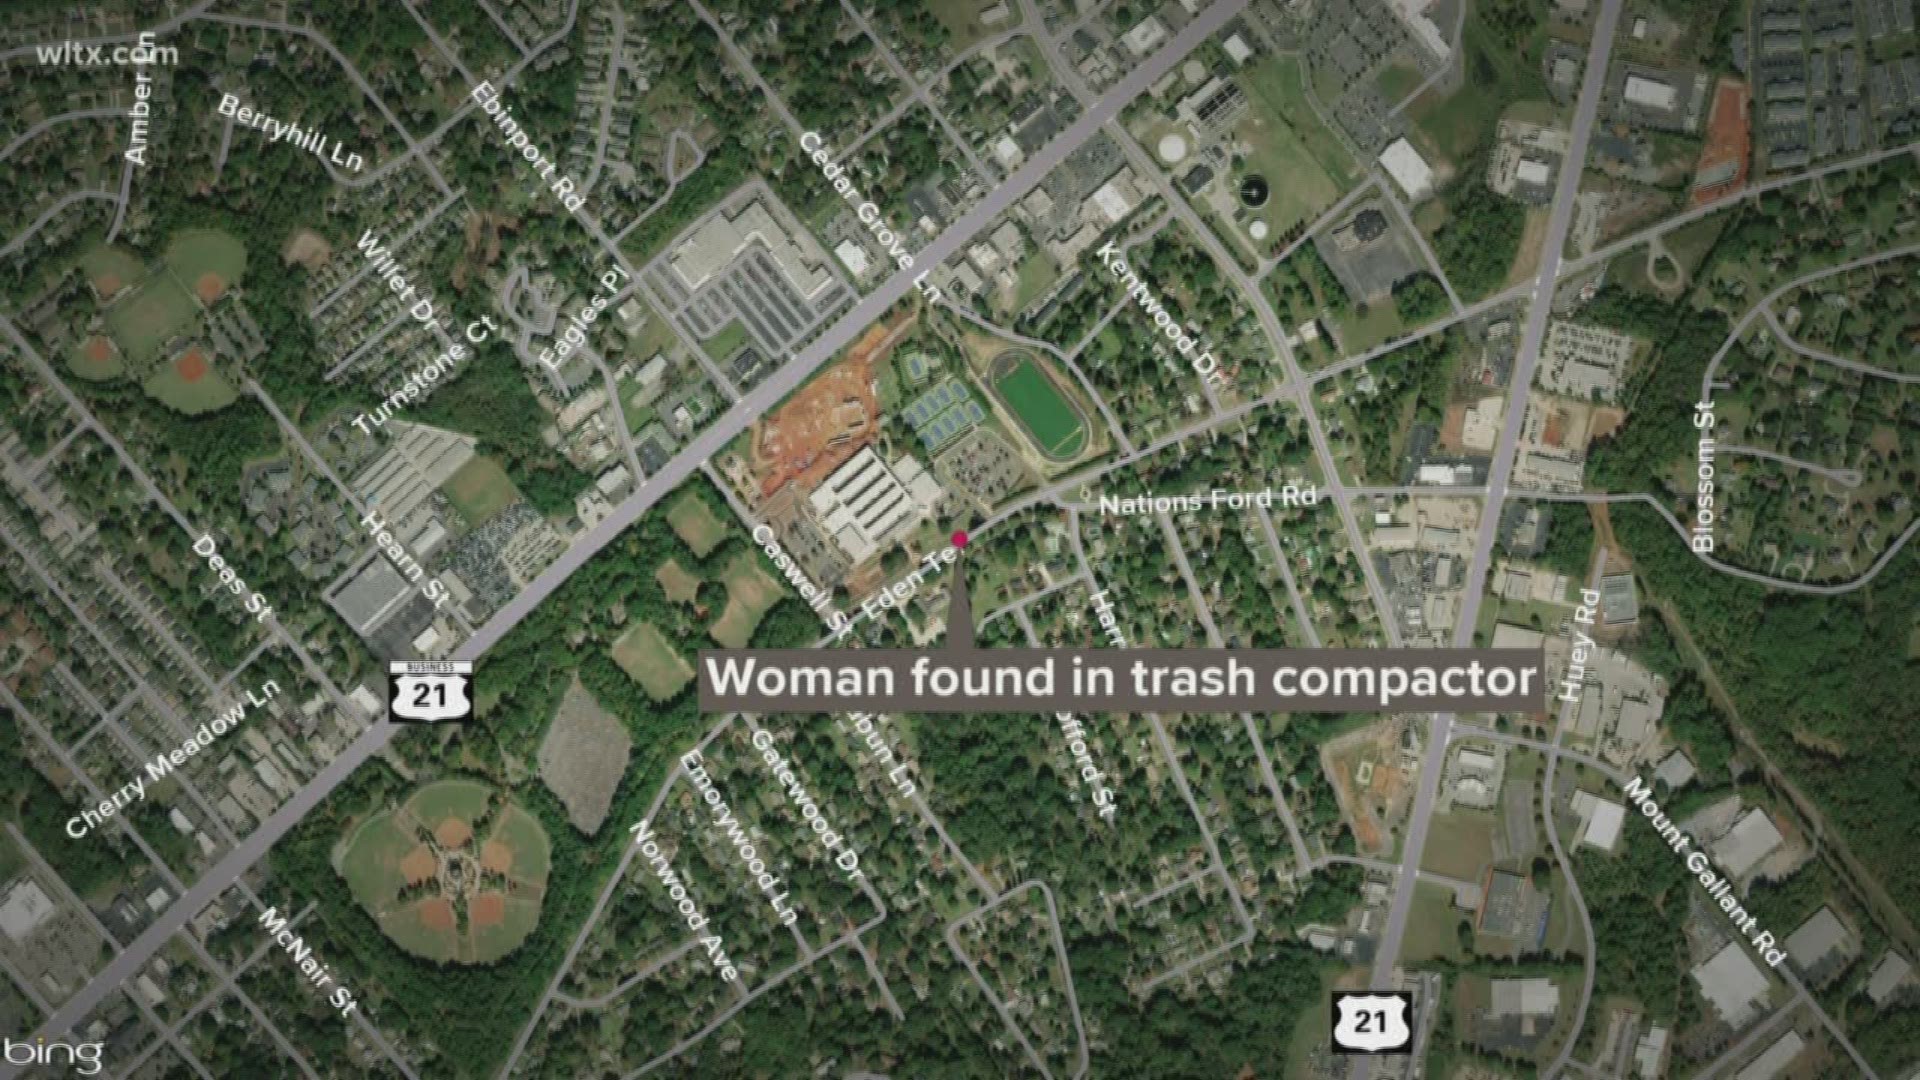 A sanitation worker in Rock Hill says the woman freed herself and ran off.